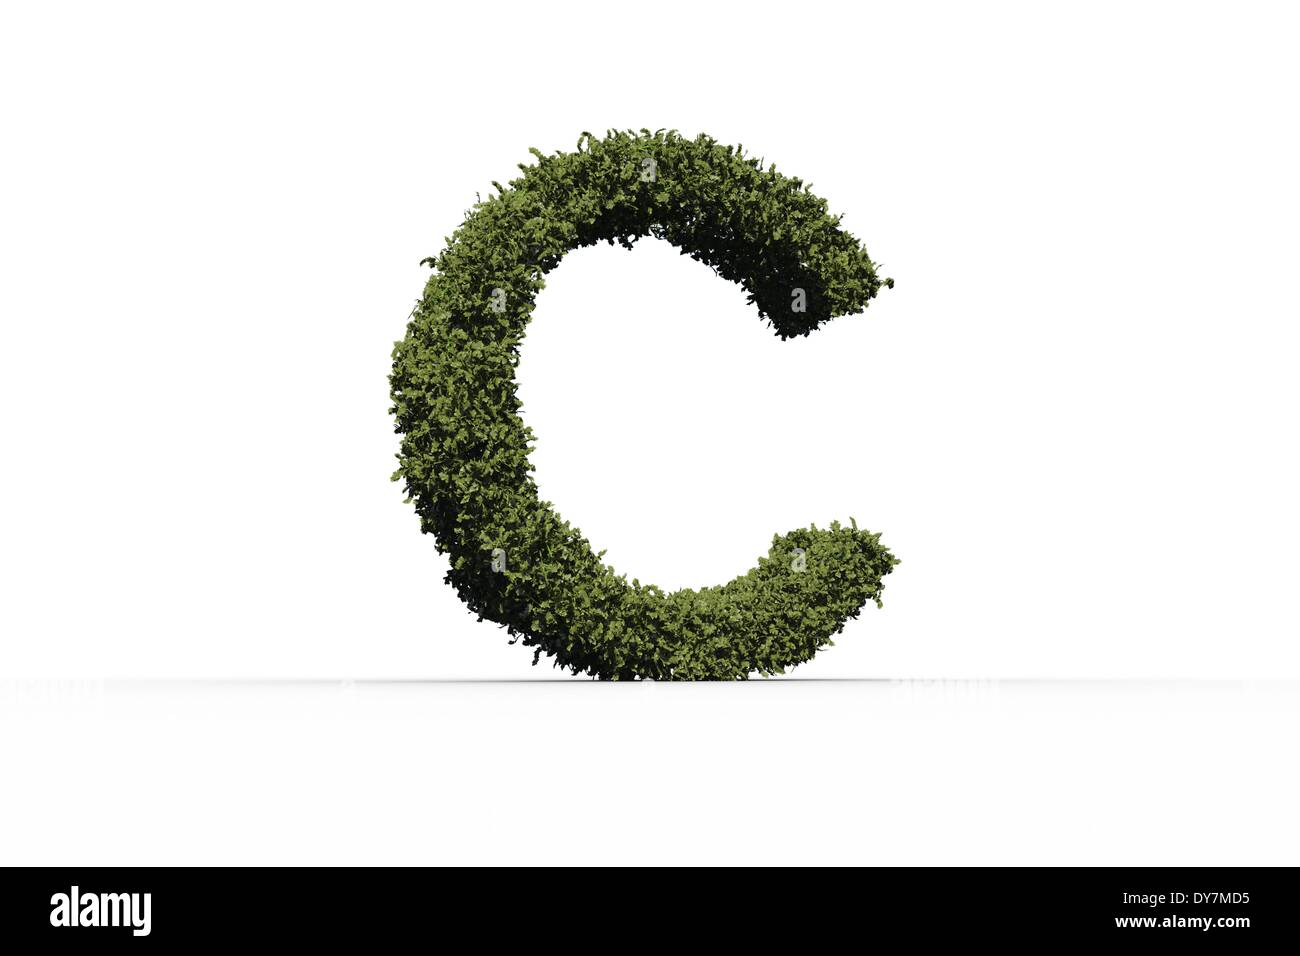 Capital letter c made of leaves Stock Photo